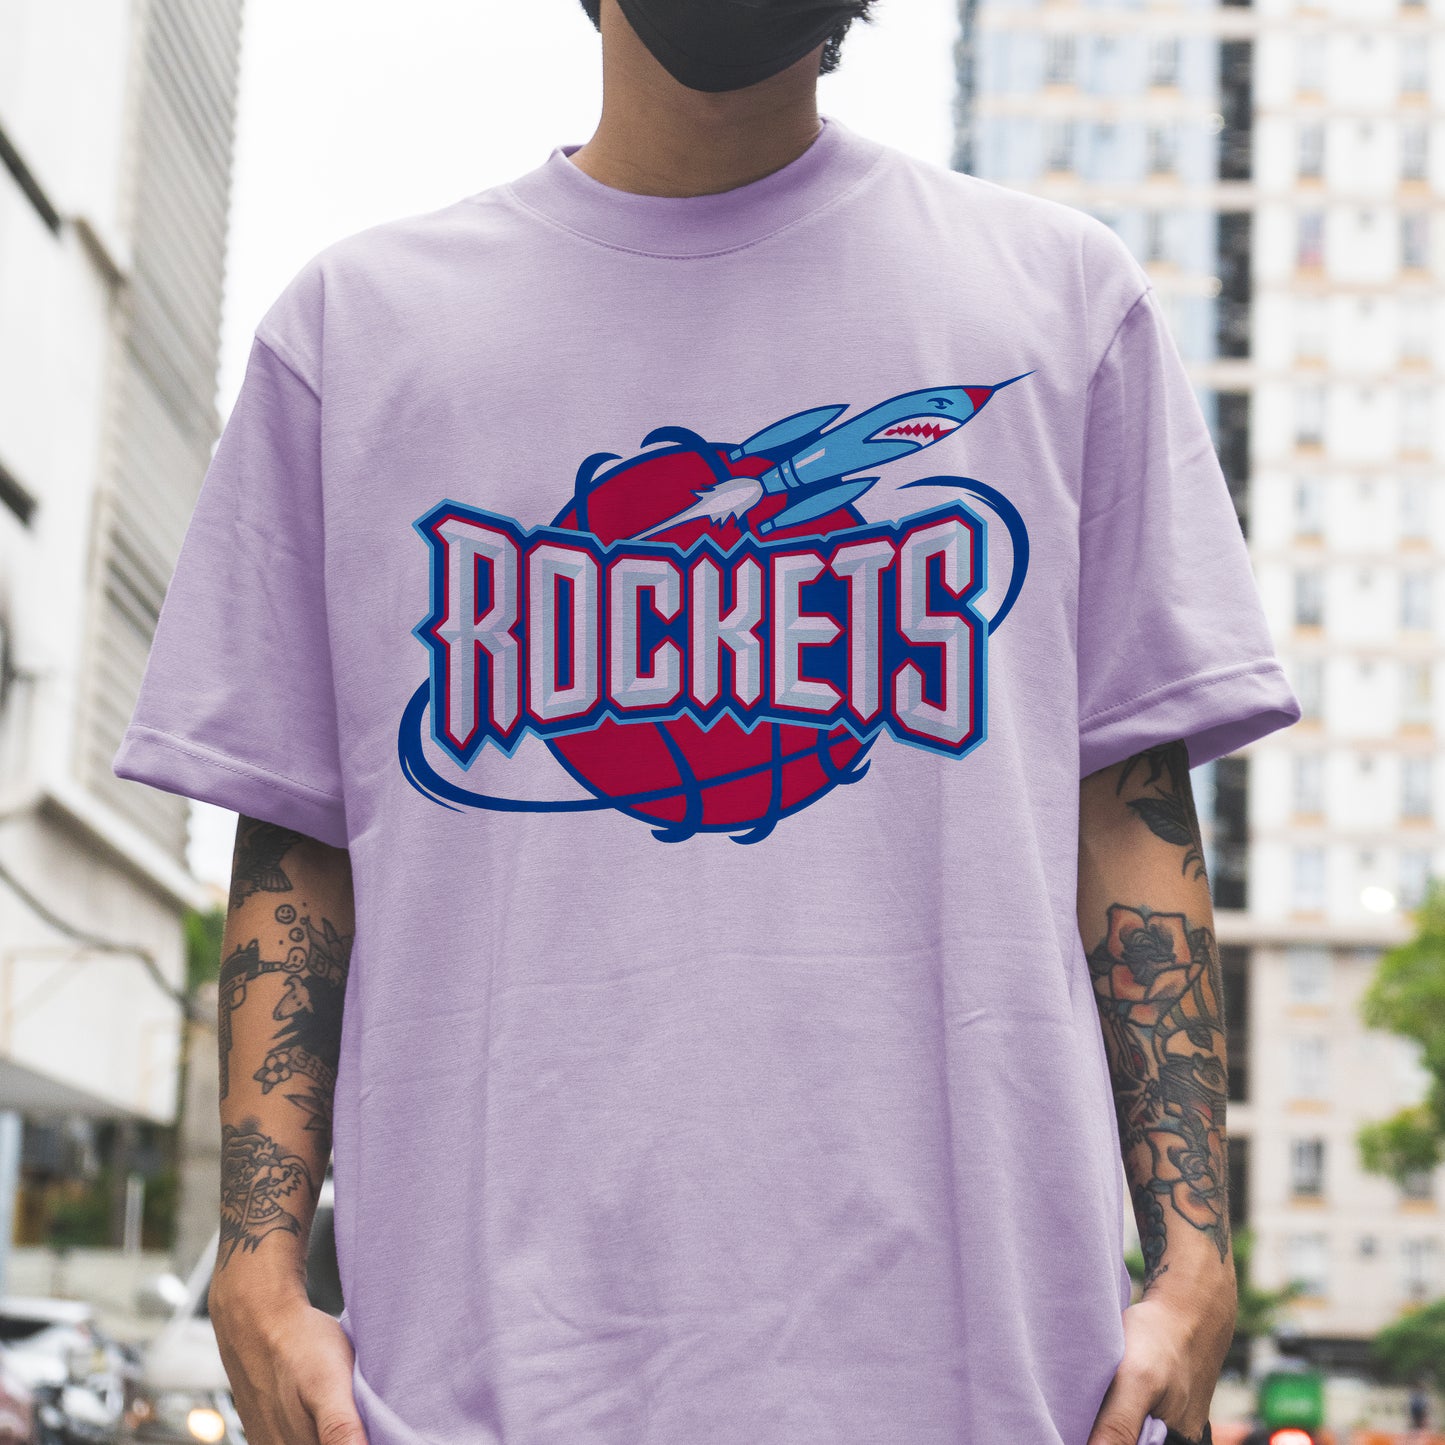 Rocket Graphic Letter Basketball Casual Men's T-Shirt